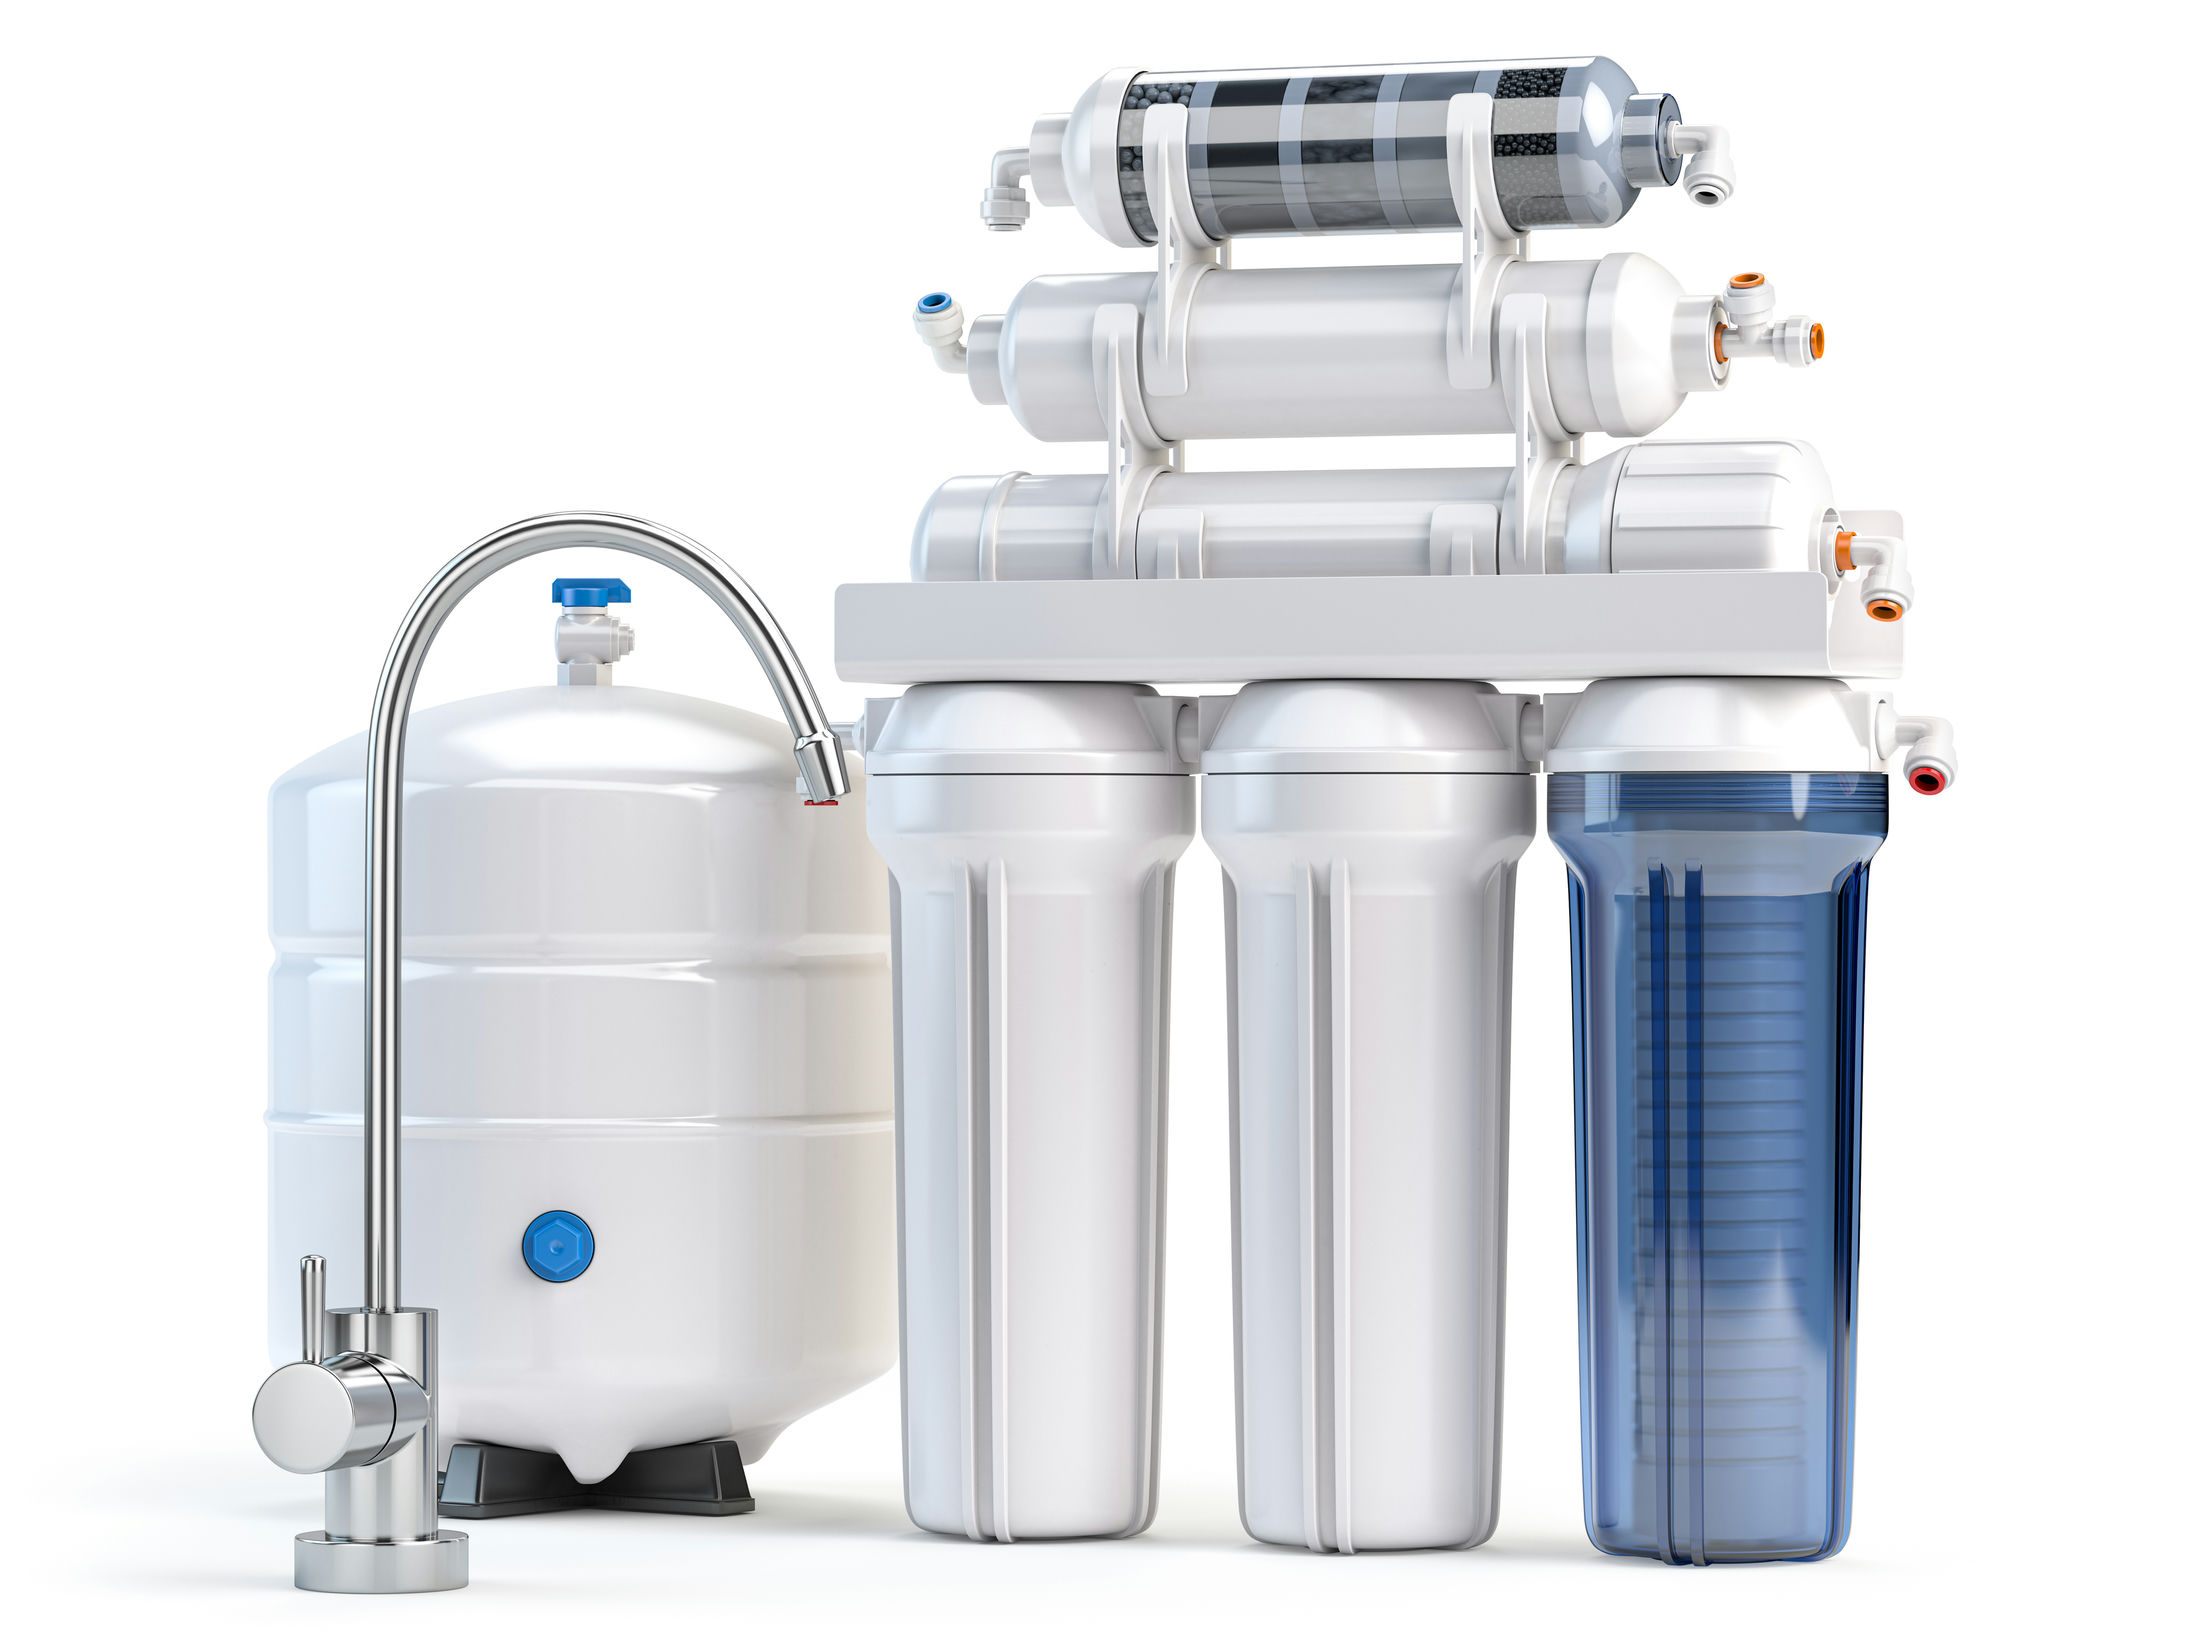 Reverse osmosis water purification system isolaterd on white. Water cleaning system. 3d illustration